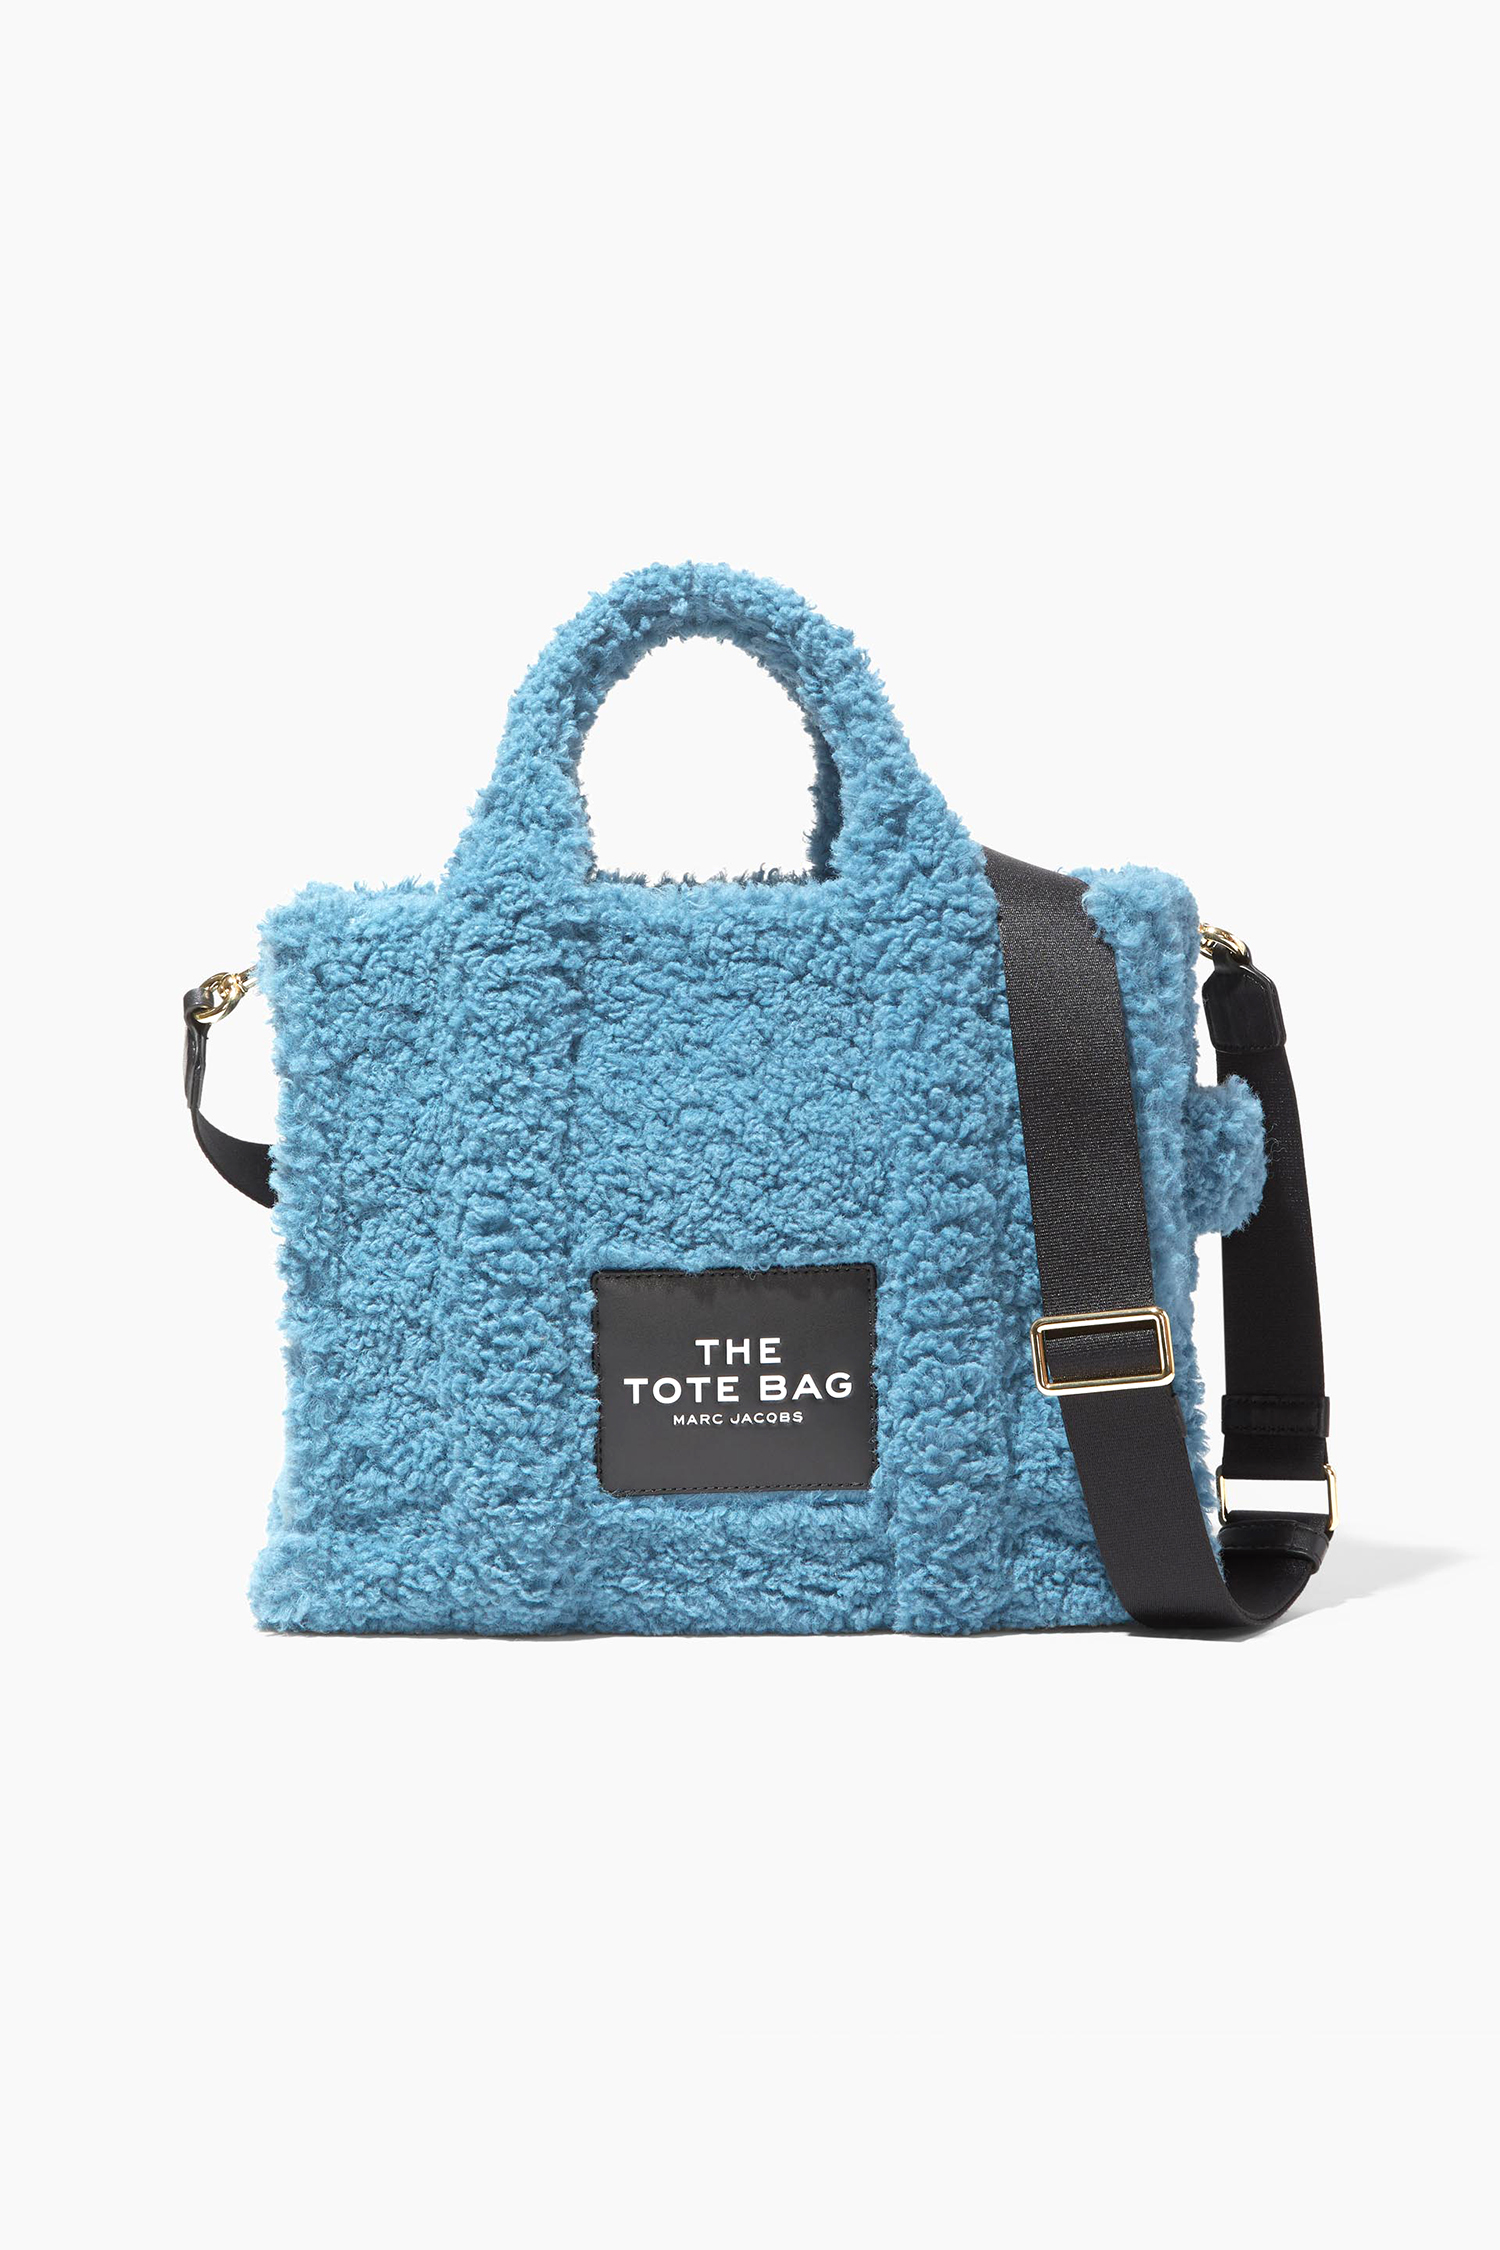 THE TEDDY SMALL TRAVELER TOTE BAG